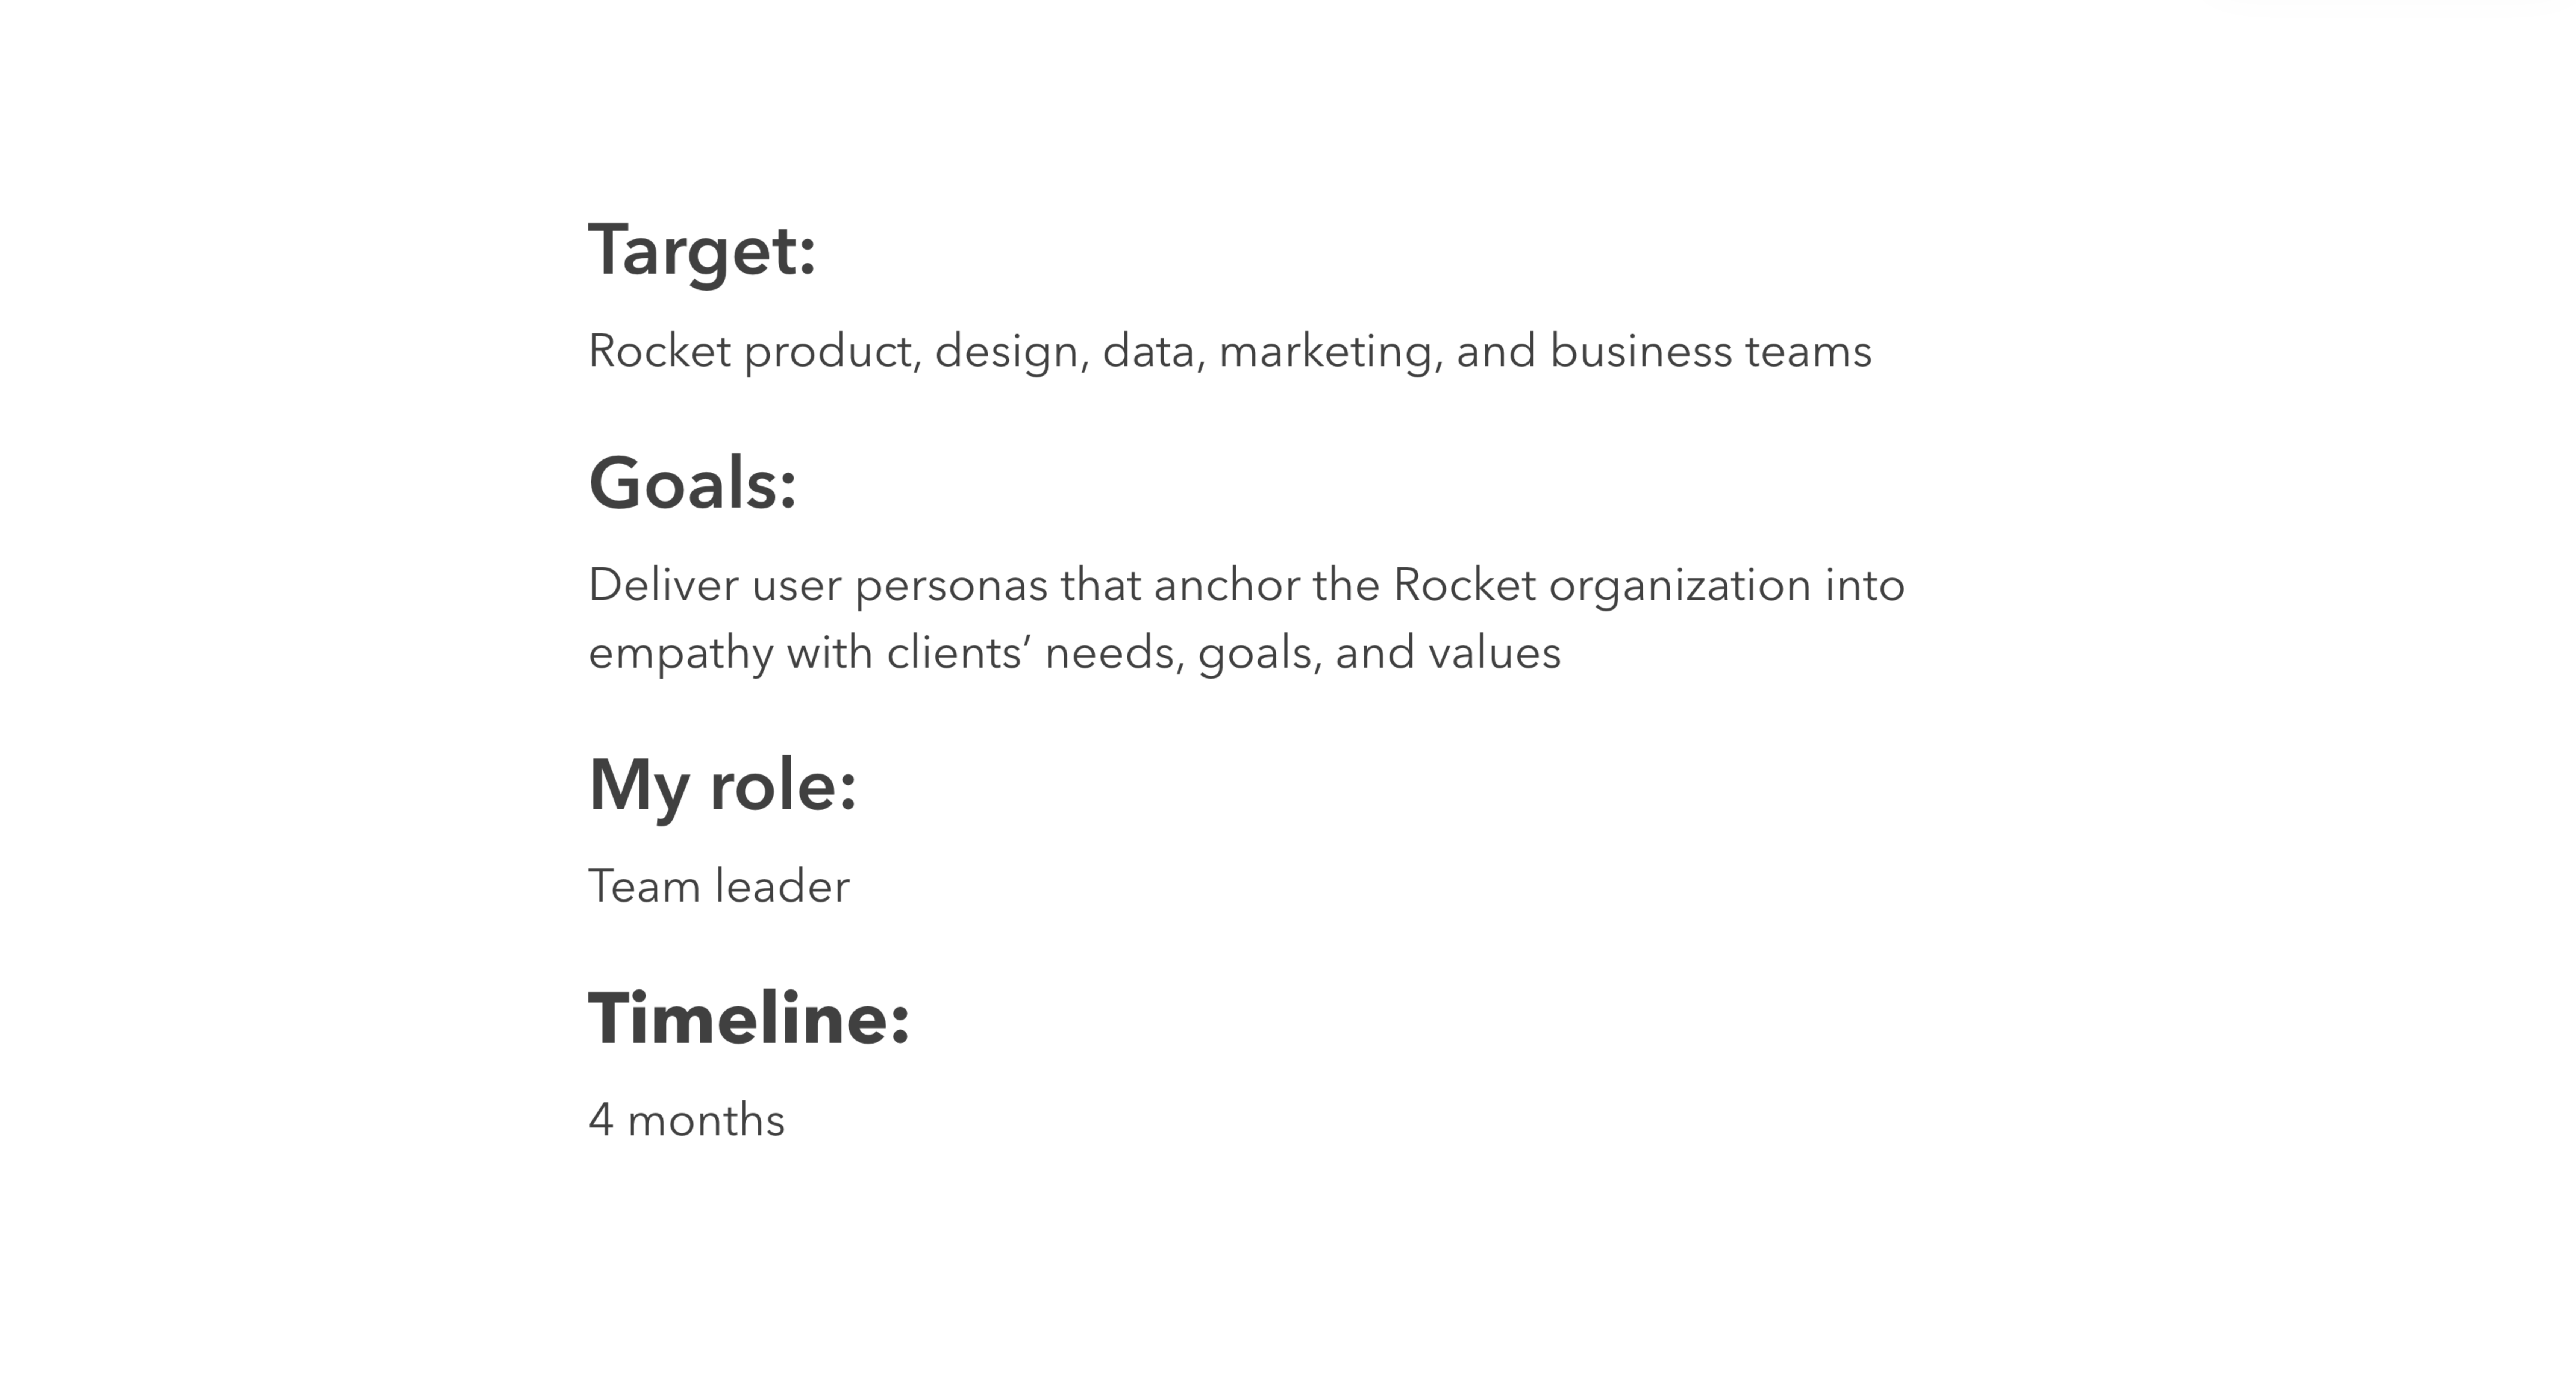 target, goals, my role, and timeline for the rocket mortgage personas ux project